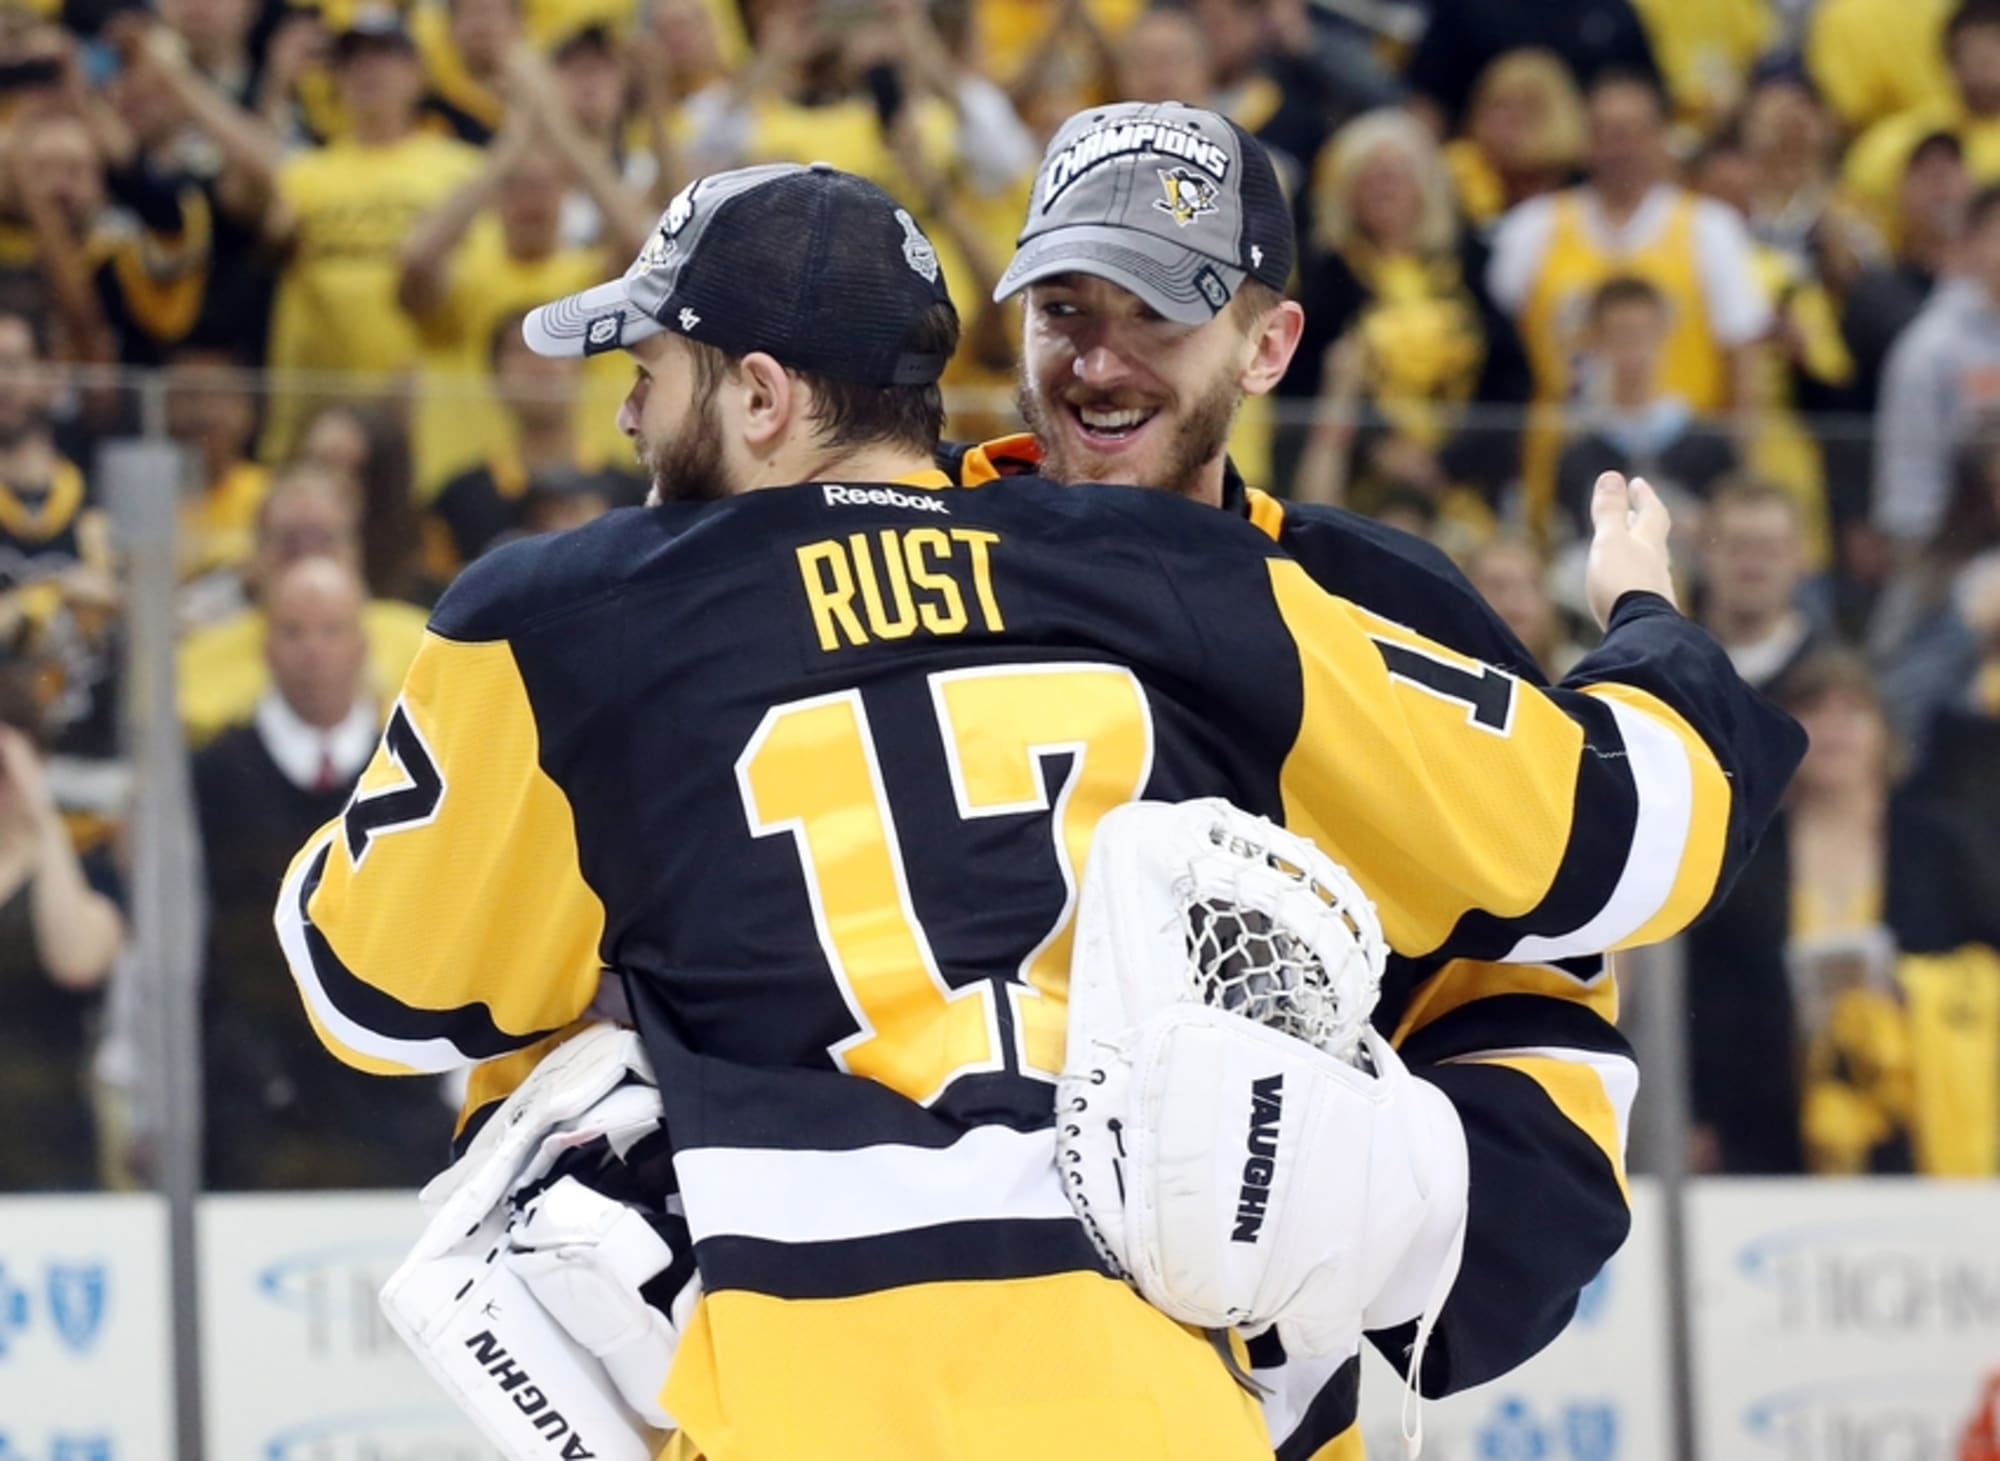 Bryan Rust - Pittsburgh Penguins Right Wing - ESPN